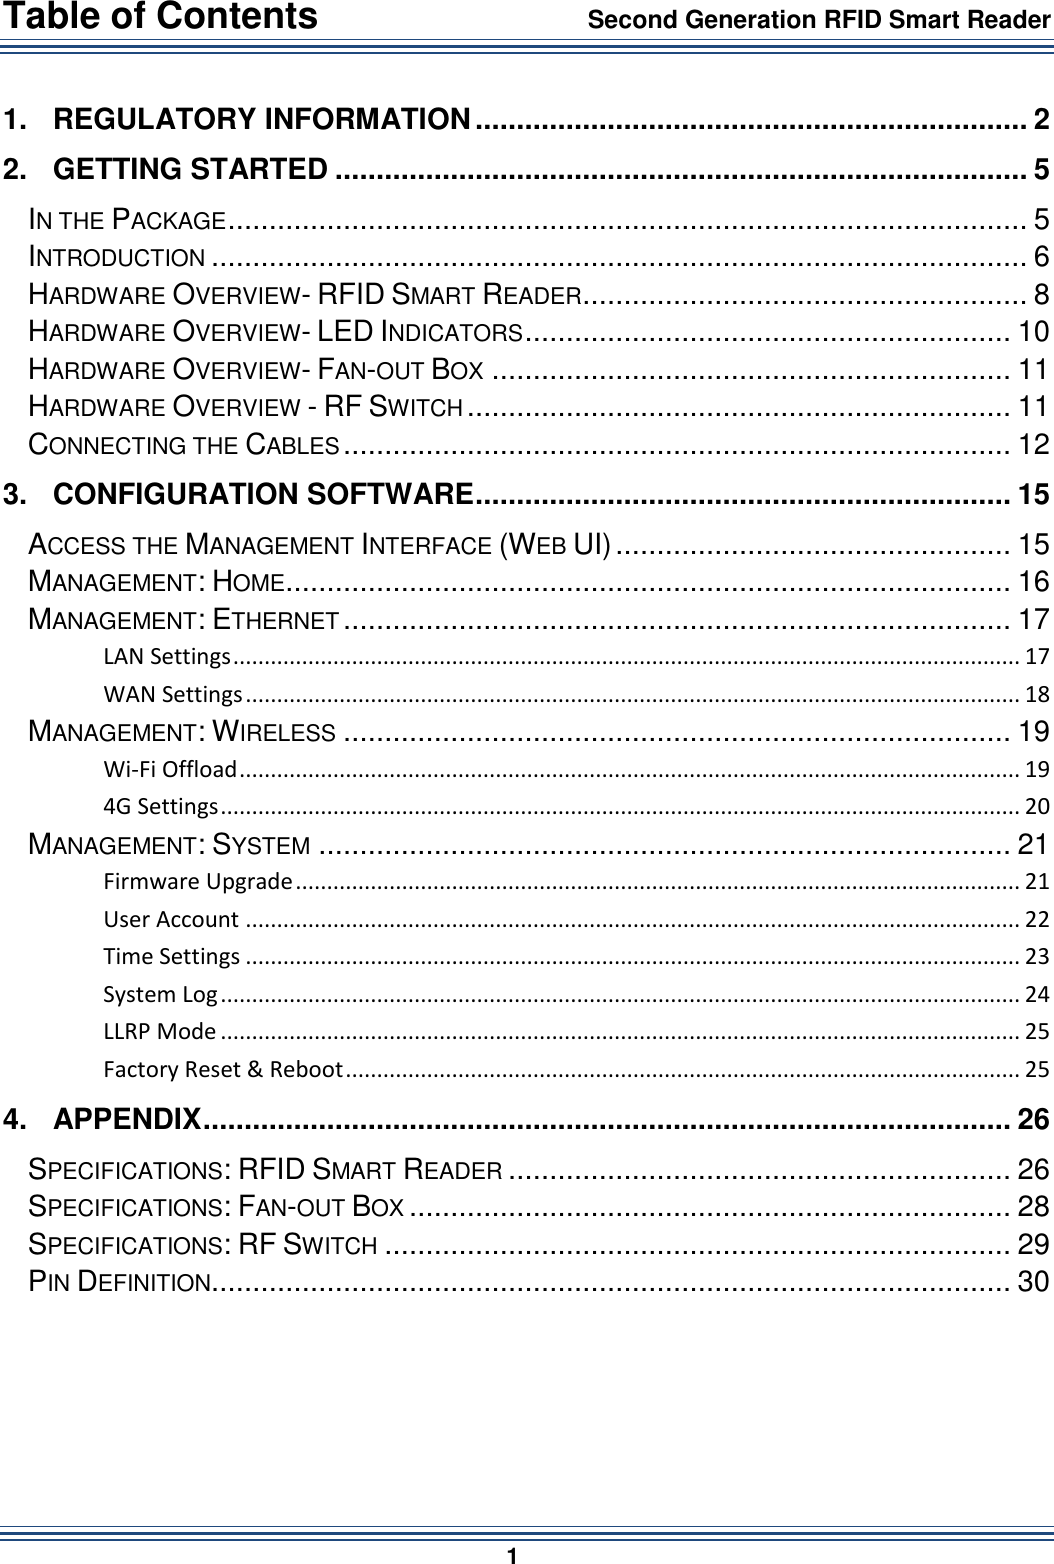 Table of Contents                 Second Generation RFID Smart Reader                        1  1. REGULATORY INFORMATION ................................................................... 2 2. GETTING STARTED .................................................................................... 5 IN THE PACKAGE ................................................................................................. 5 INTRODUCTION ................................................................................................... 6 HARDWARE OVERVIEW- RFID SMART READER ...................................................... 8 HARDWARE OVERVIEW- LED INDICATORS ........................................................... 10 HARDWARE OVERVIEW- FAN-OUT BOX ............................................................... 11 HARDWARE OVERVIEW - RF SWITCH .................................................................. 11 CONNECTING THE CABLES ................................................................................. 12 3. CONFIGURATION SOFTWARE ................................................................. 15 ACCESS THE MANAGEMENT INTERFACE (WEB UI) ................................................ 15 MANAGEMENT: HOME ........................................................................................ 16 MANAGEMENT: ETHERNET ................................................................................. 17 LAN Settings .............................................................................................................................. 17 WAN Settings ............................................................................................................................ 18 MANAGEMENT: WIRELESS ................................................................................. 19 Wi-Fi Offload ............................................................................................................................. 19 4G Settings ................................................................................................................................ 20 MANAGEMENT: SYSTEM .................................................................................... 21 Firmware Upgrade .................................................................................................................... 21 User Account ............................................................................................................................ 22 Time Settings ............................................................................................................................ 23 System Log ................................................................................................................................ 24 LLRP Mode ................................................................................................................................ 25 Factory Reset &amp; Reboot ............................................................................................................ 25 4. APPENDIX .................................................................................................. 26 SPECIFICATIONS: RFID SMART READER ............................................................. 26 SPECIFICATIONS: FAN-OUT BOX ......................................................................... 28 SPECIFICATIONS: RF SWITCH ............................................................................ 29 PIN DEFINITION ................................................................................................. 30   